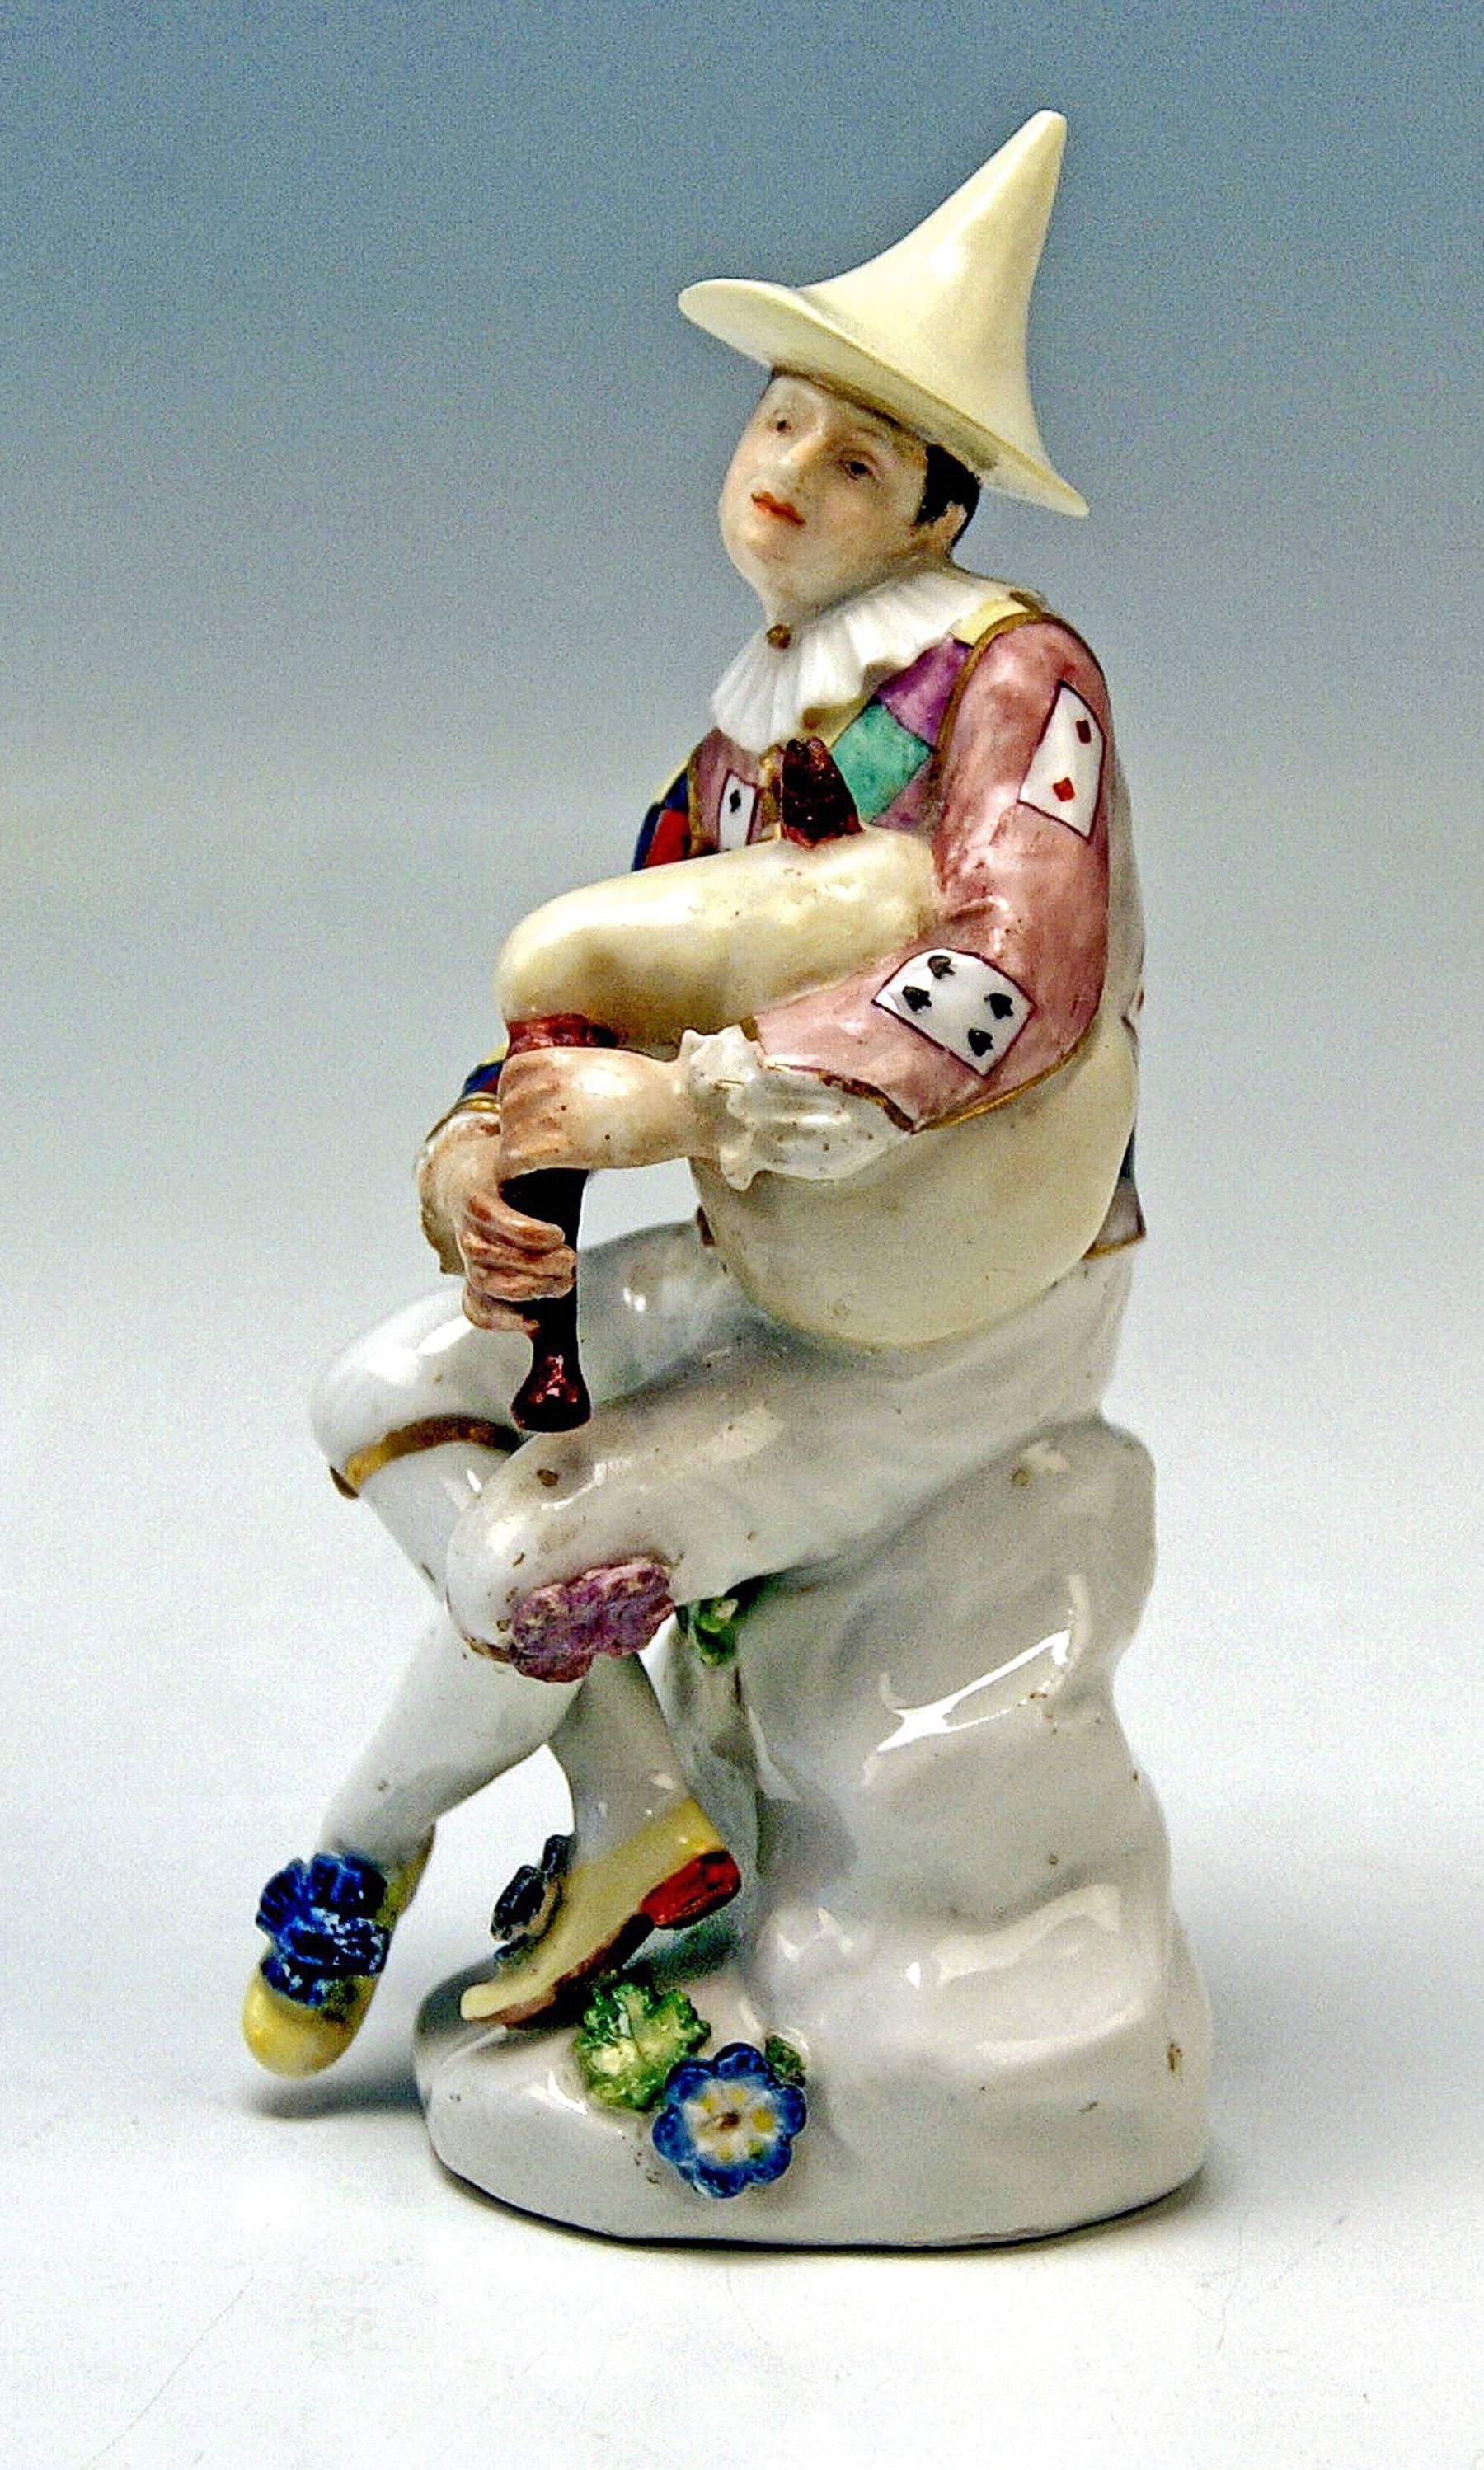 Meissen Rococo harlequin with bagpipes of most lovely appearance.:
The lovely harlequin is sitting on a rocky base which is decorated with some flower blossoms with leaves. The male figurine seizes bagpipes with both hands, seeming to be a bit